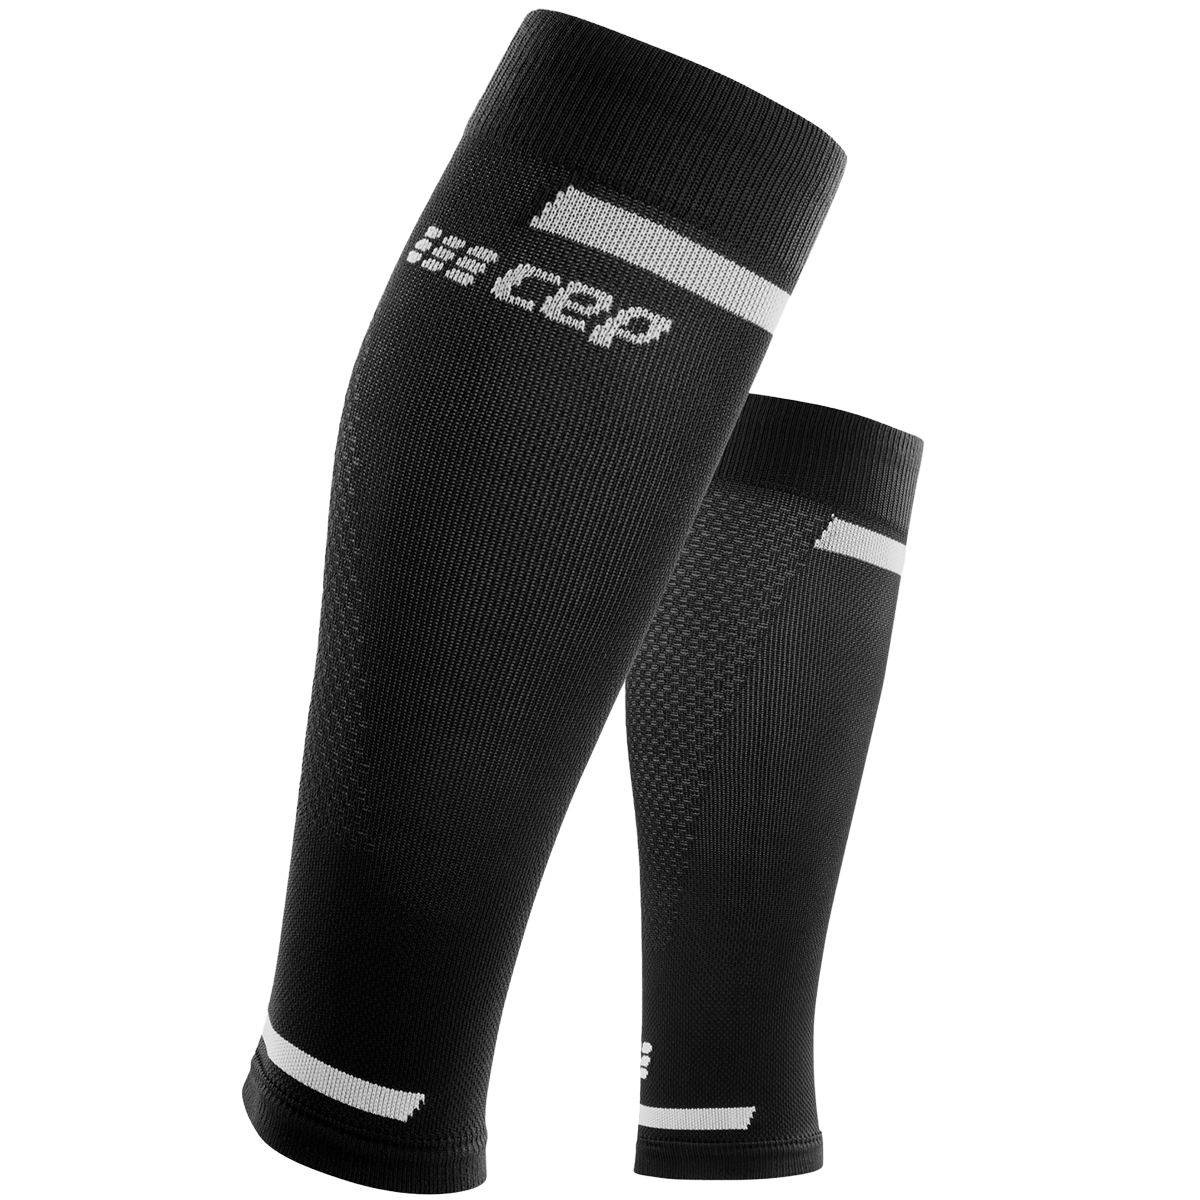 Women's leg compression sleeve CEP Compression - Arm sleeves - Protections  - Equipment